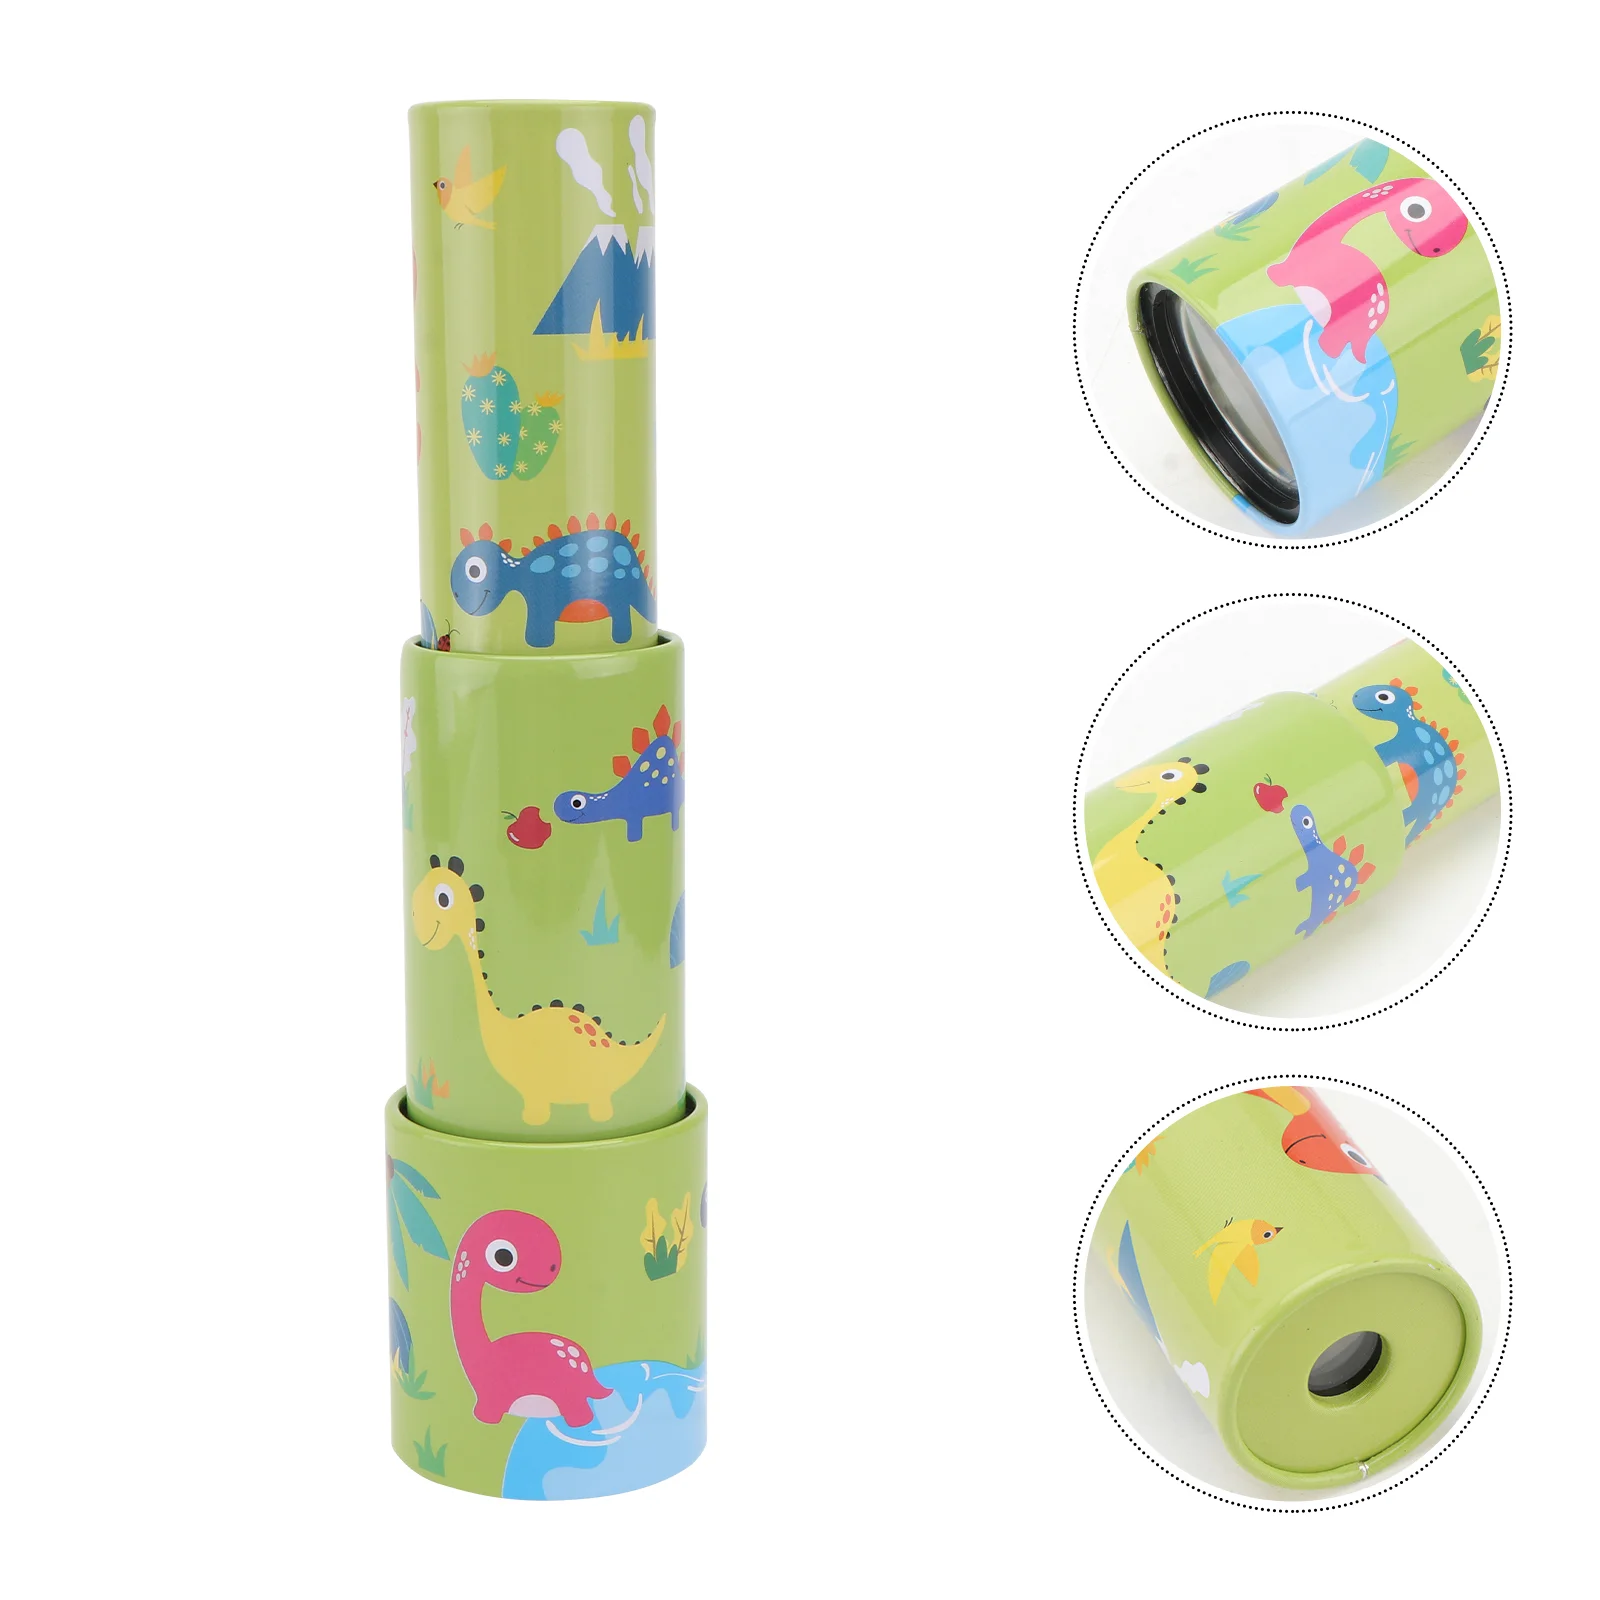 

Toy Kids Toys Science Pirate Spyglass Handheld Educational Children Early Baby Decorative Education Captain Mini Child Watching